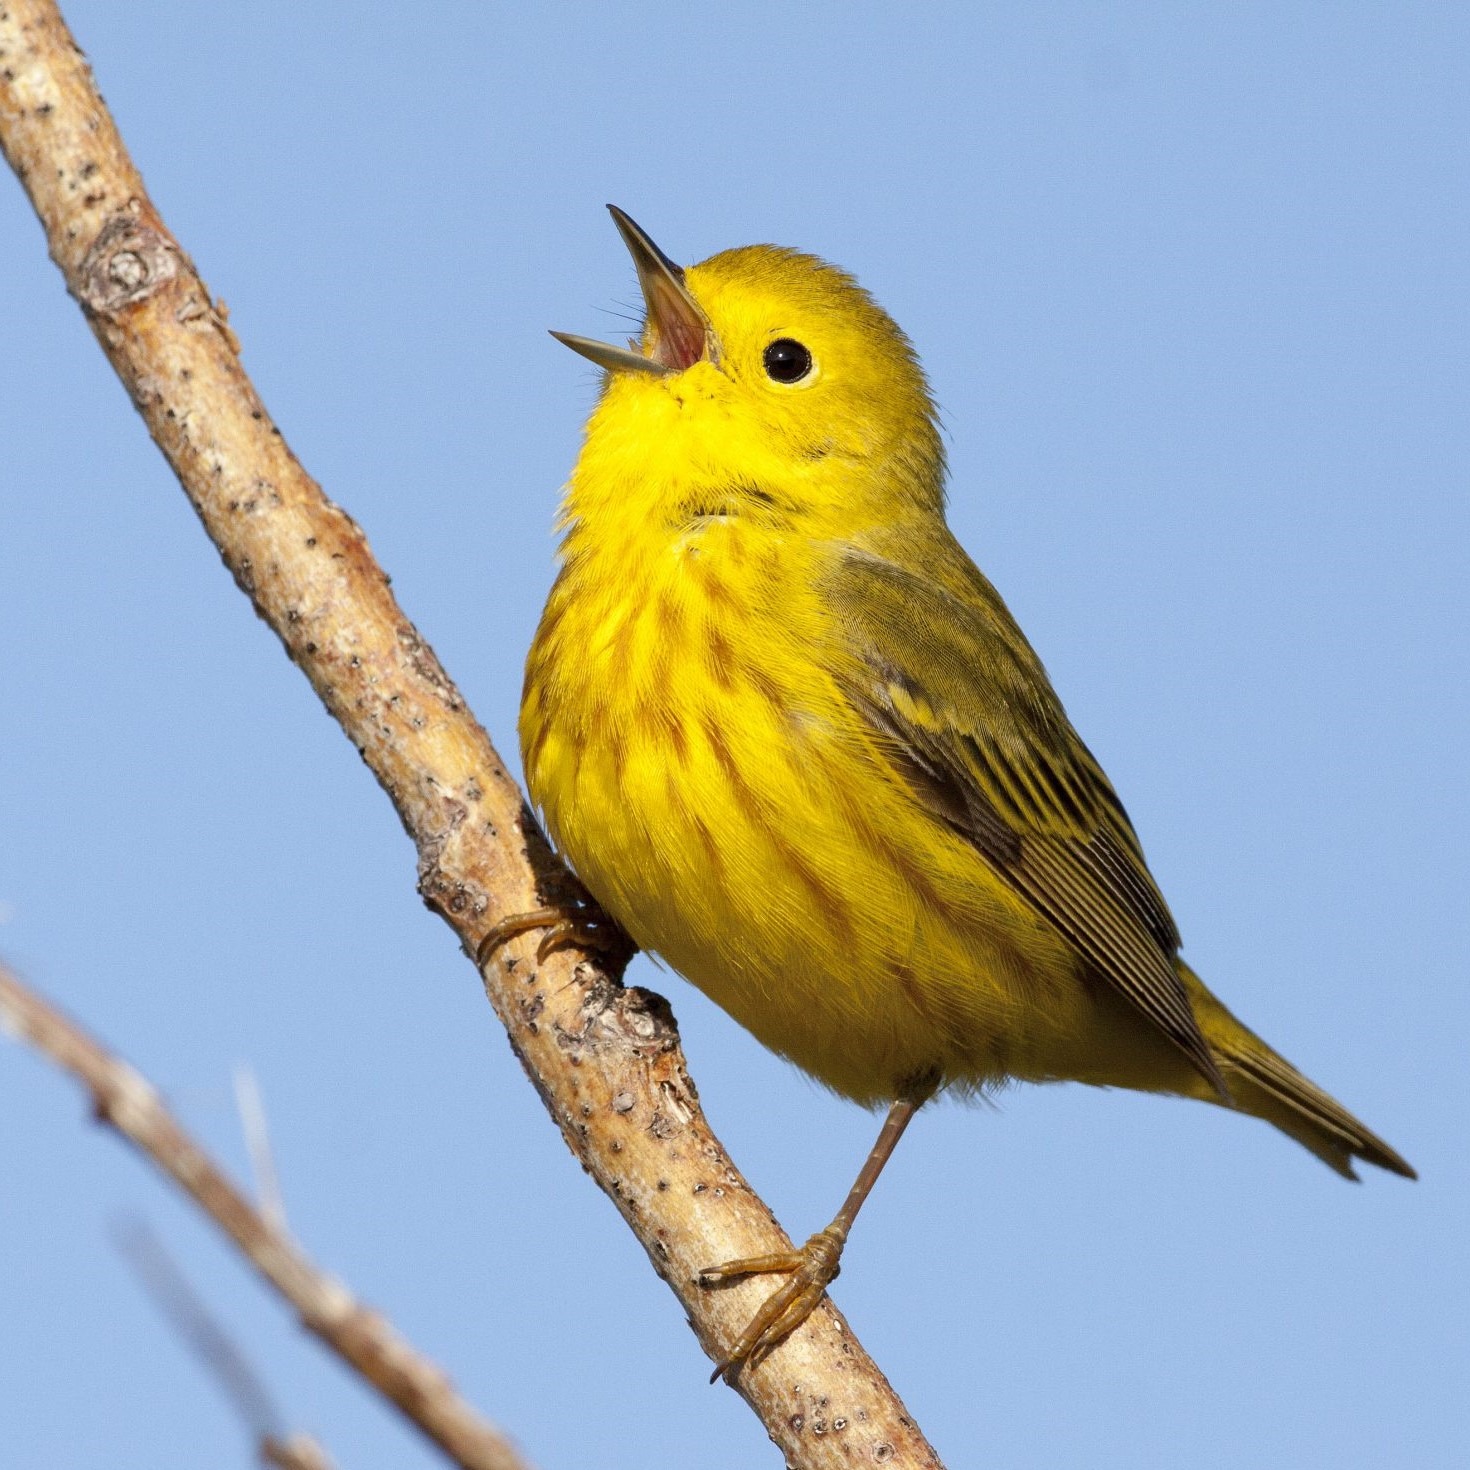 A small yellow bird sings with a puffed chest and a white open beak